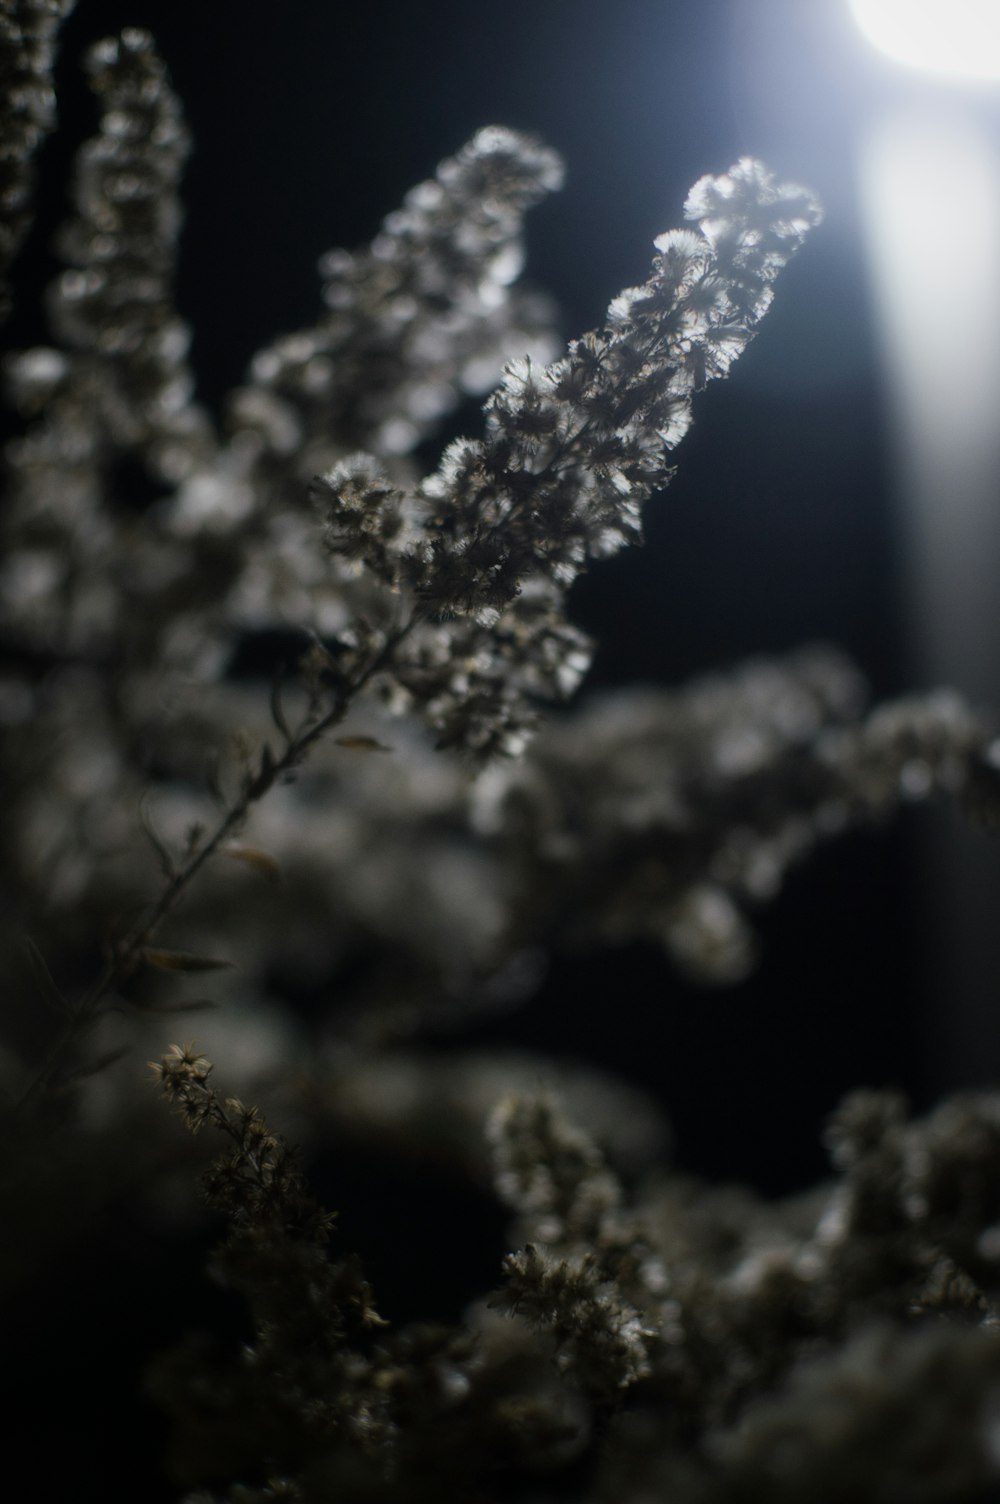 a close up of a plant with a street light in the background